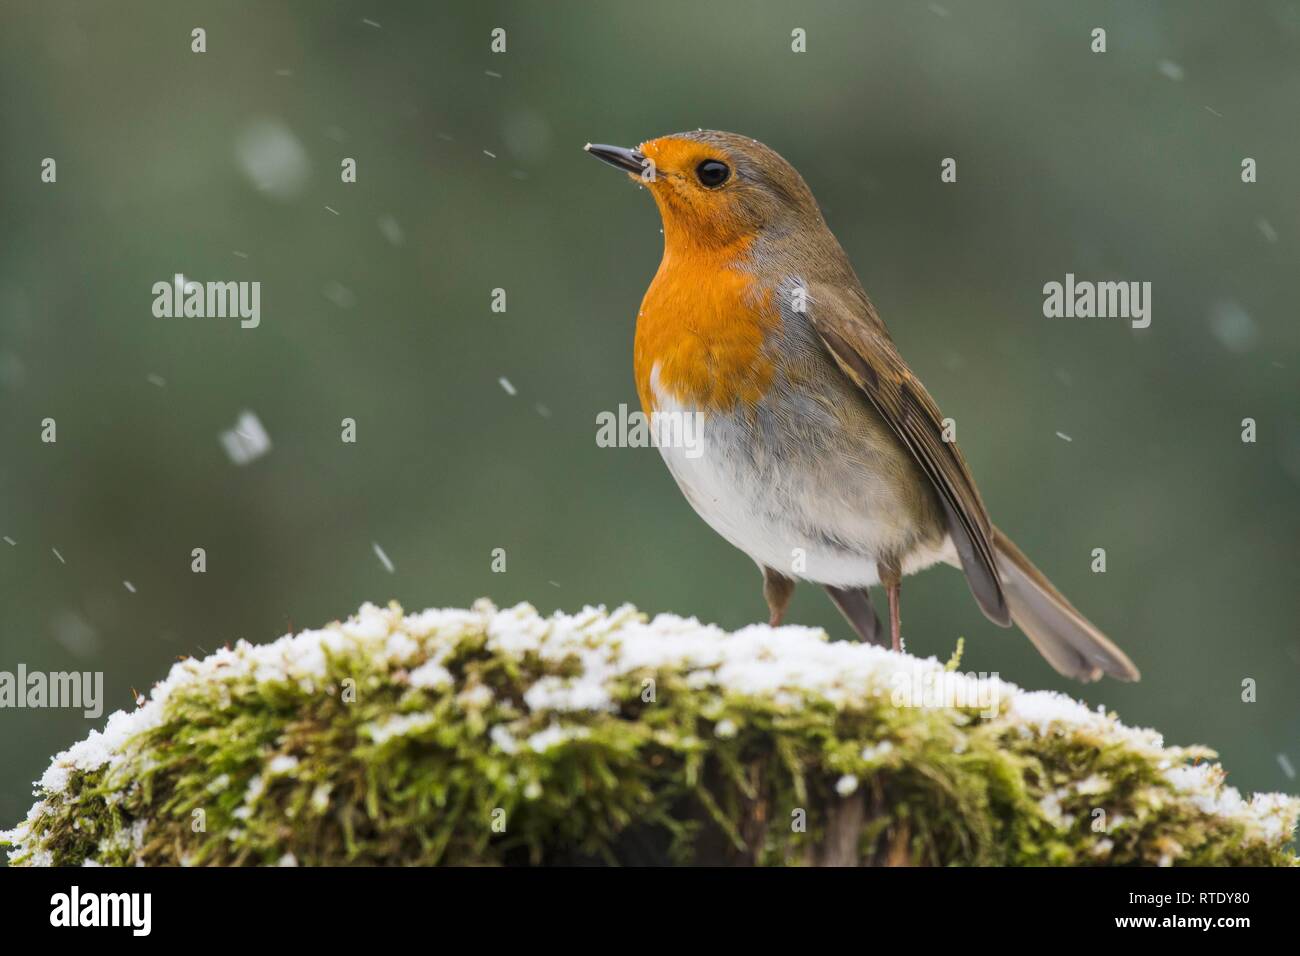 European robin (Erithacus rubecula), sits on moss during snowfall, Emsland, Lower Saxony, Germany Stock Photo